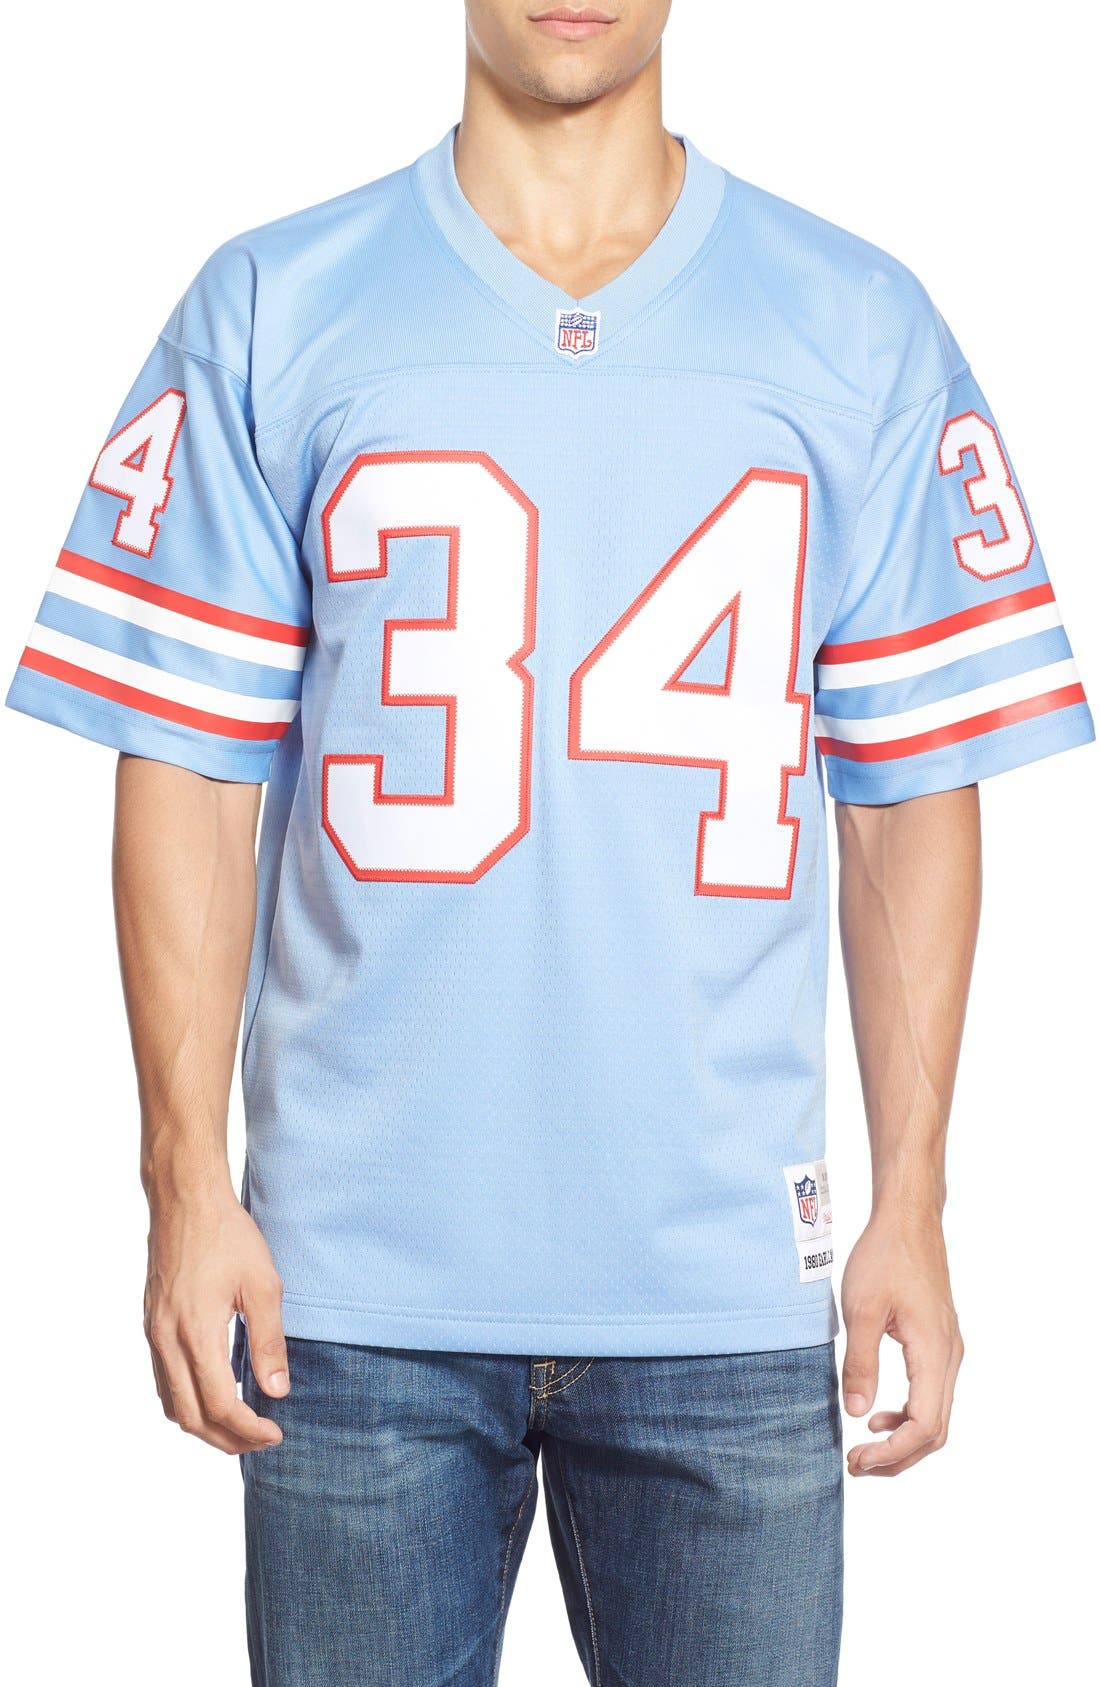 mitchell and ness earl campbell jersey